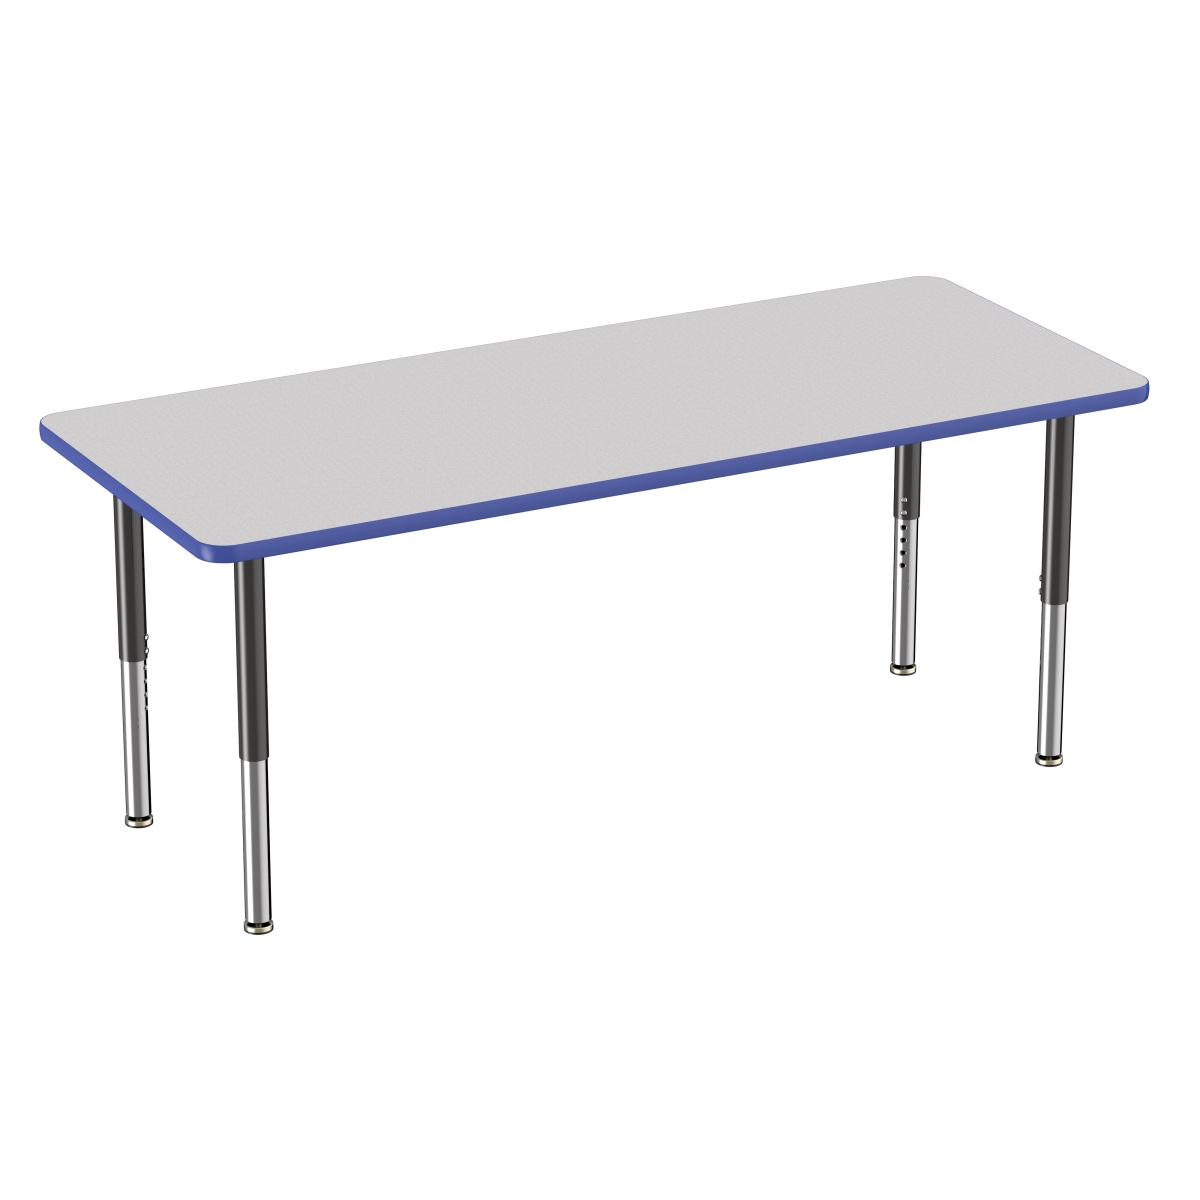 10030-gybl 30 X 72 In. Rectangle T-mold Adjustable Activity Table With Super Leg - Grey & Blue